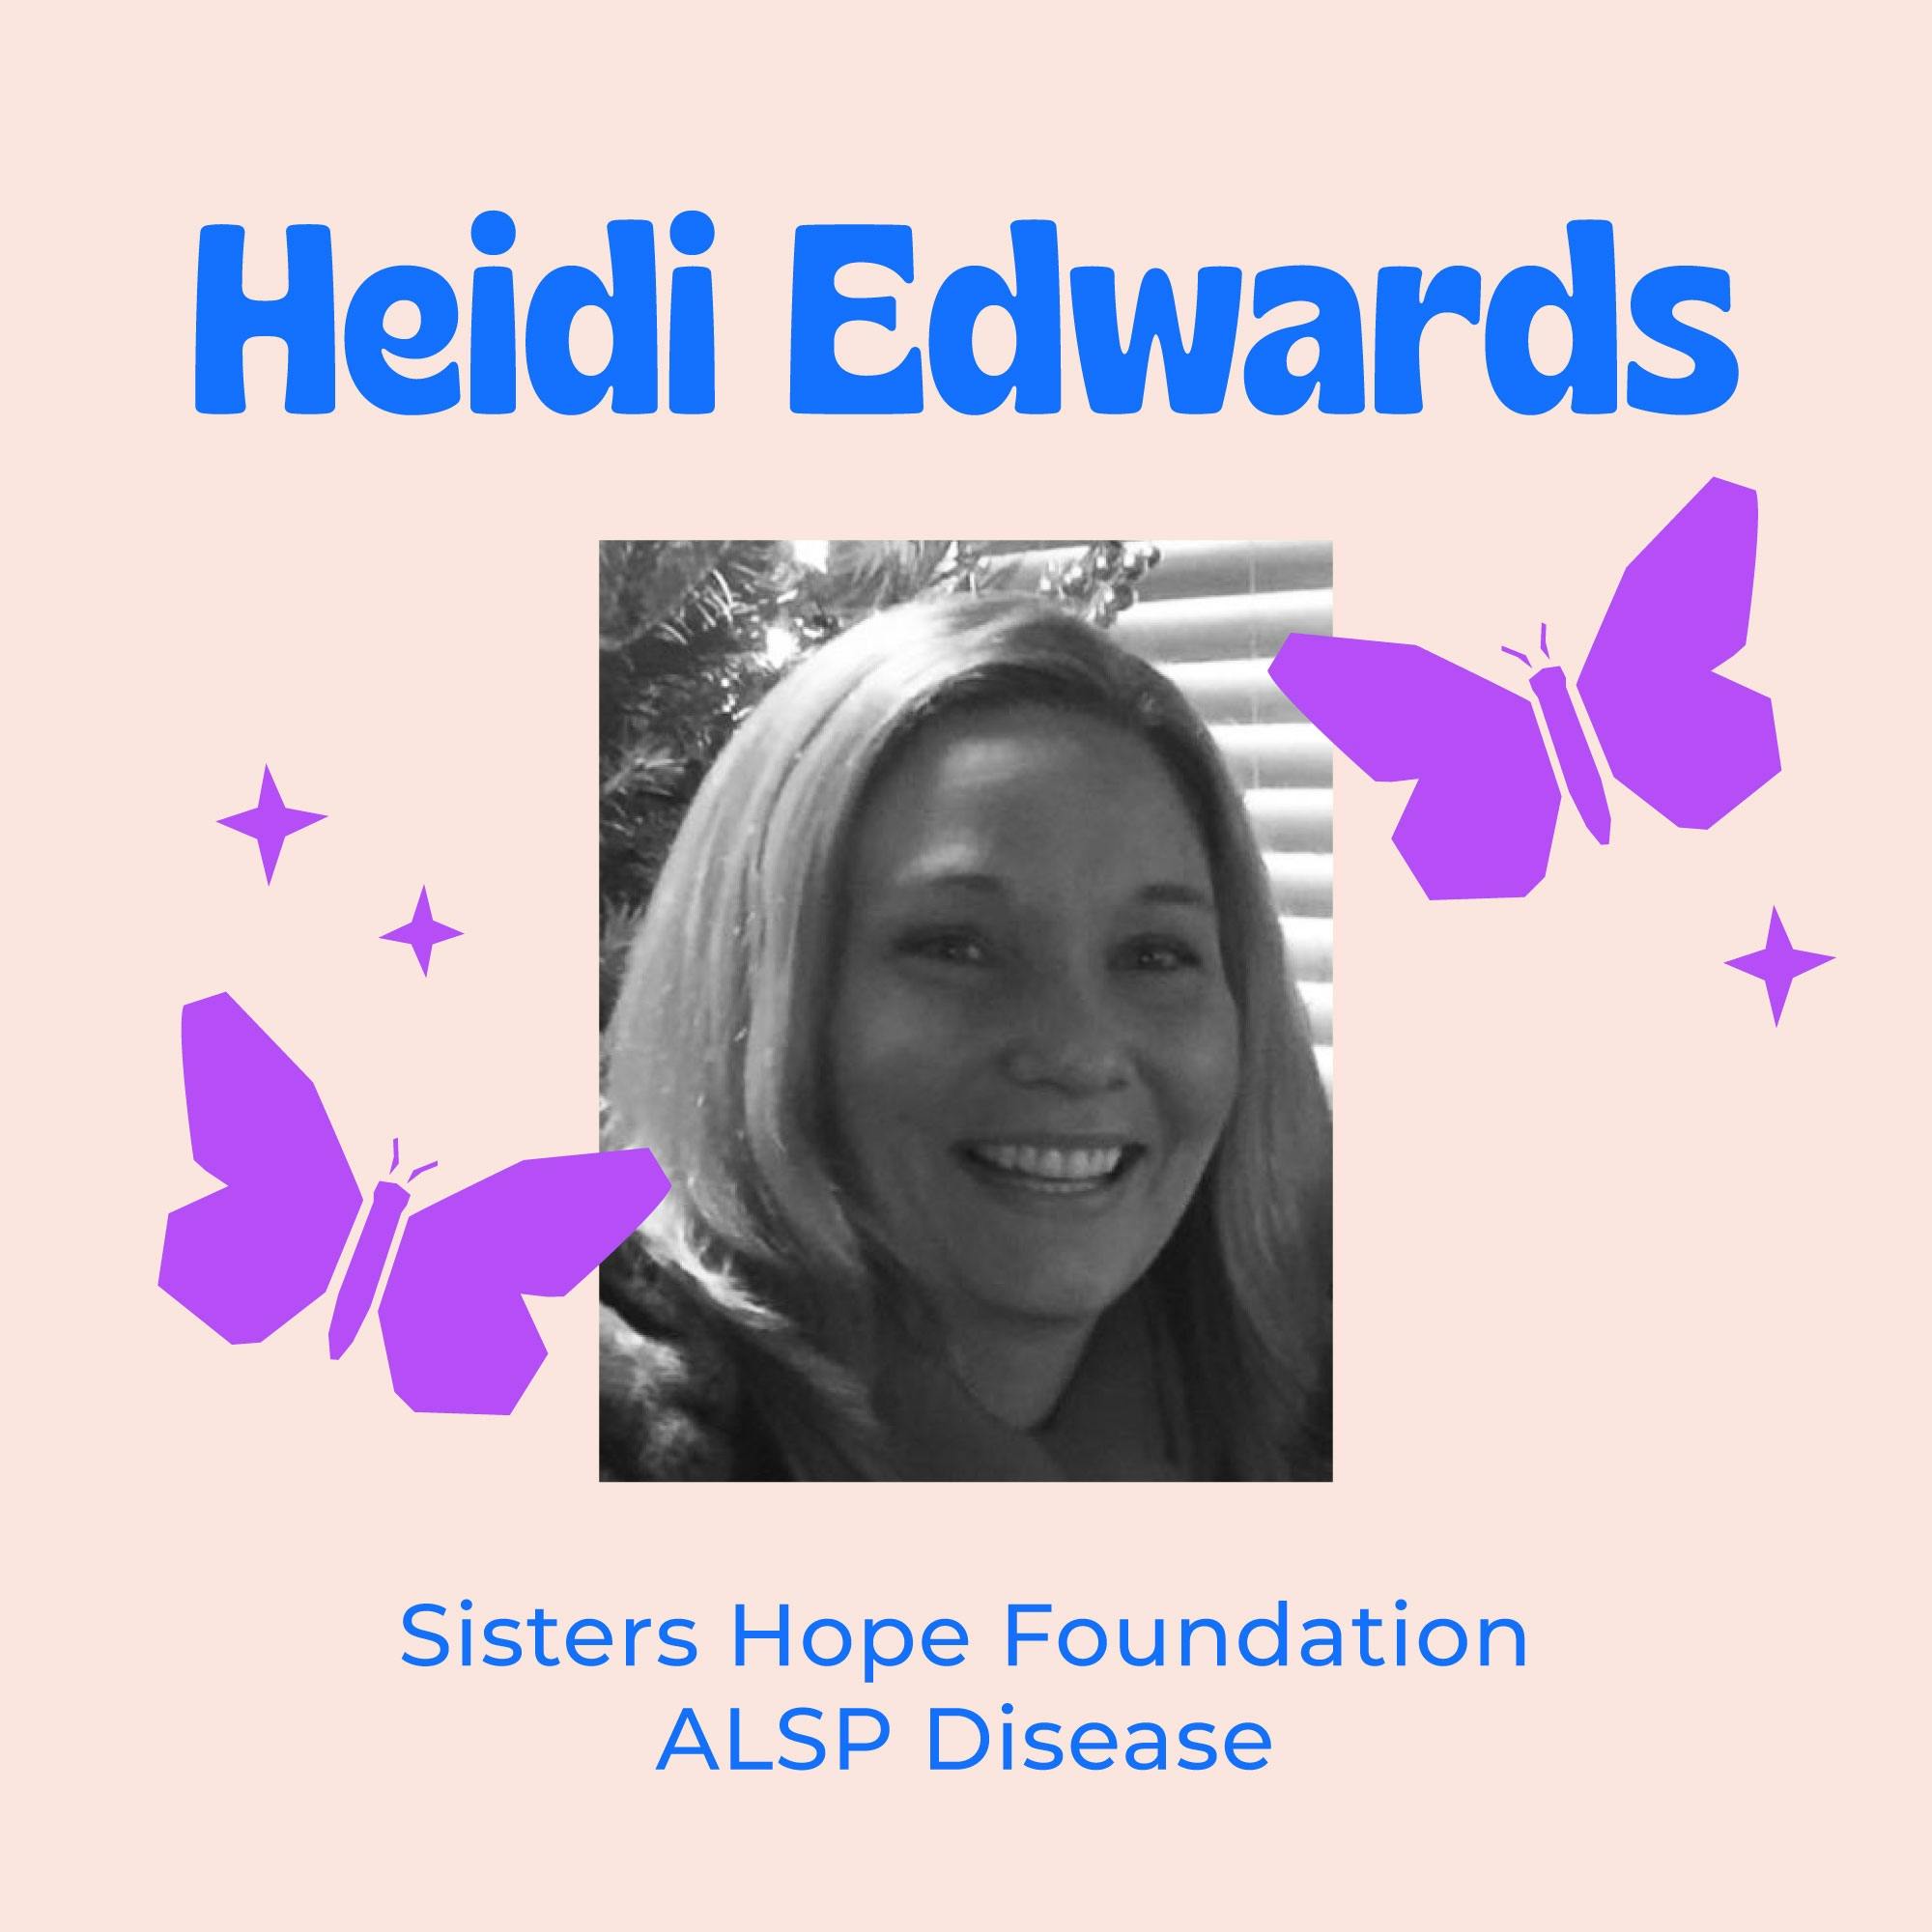 Sisters’ Hope Foundation President and Founder Heidi Edwards on Recognizing ALSP Symptoms and the Importance of Genetic Testing